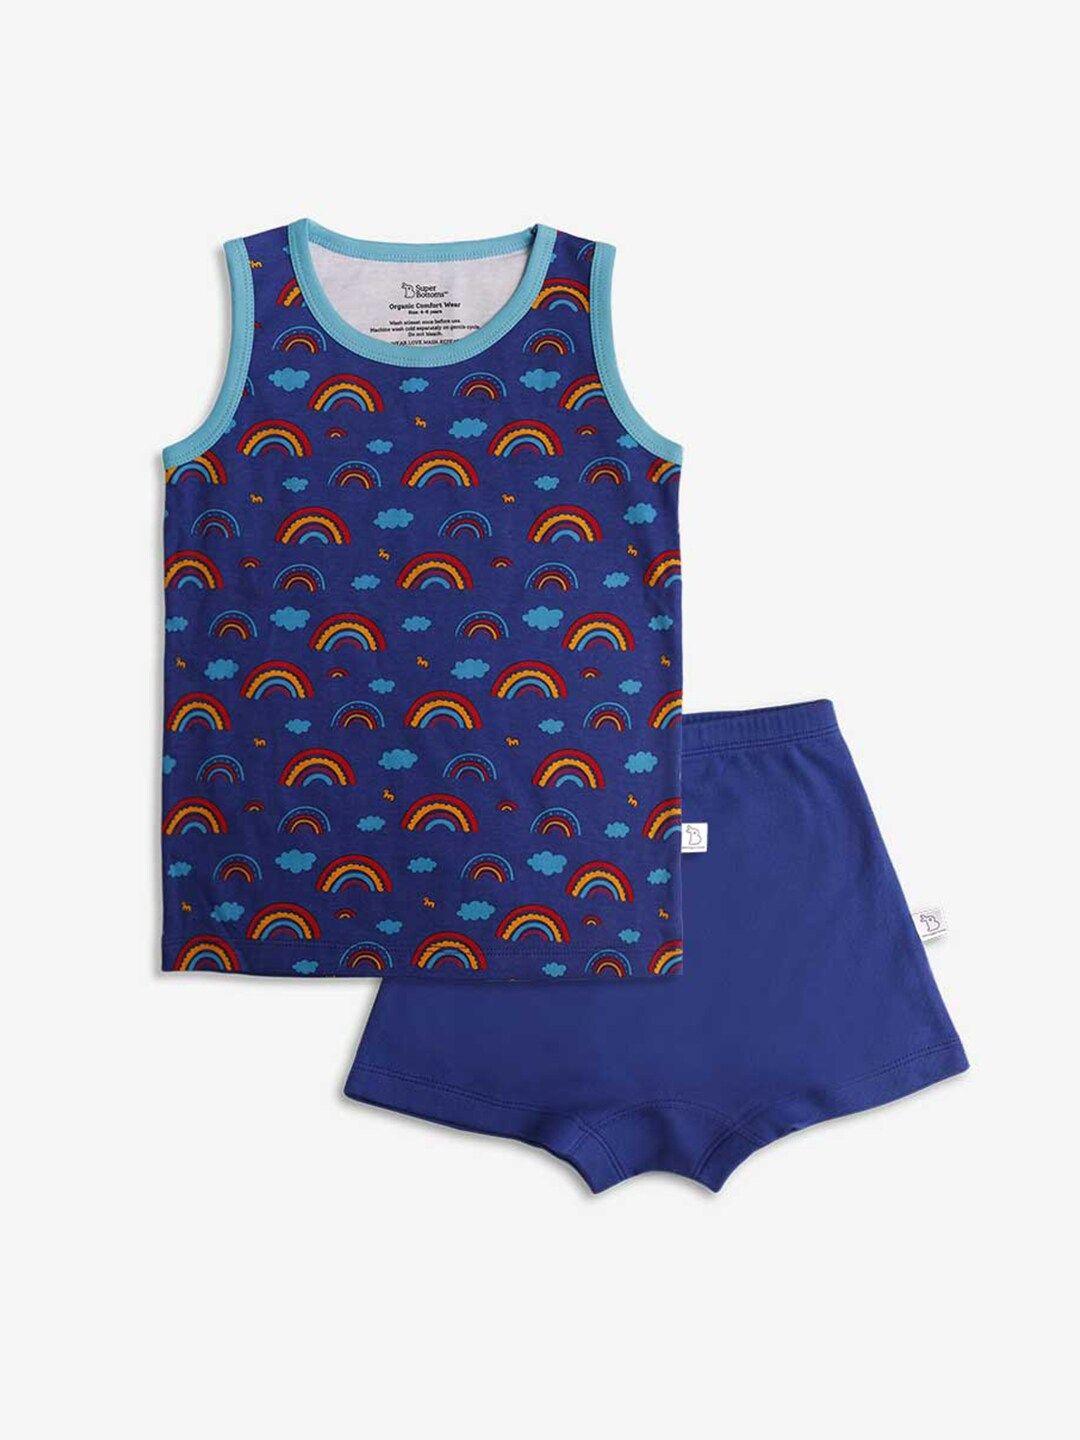 superbottoms-kids-blue-&-red-printed-organic-cotton-sustainable-sustainable-t-shirt-with-shorts